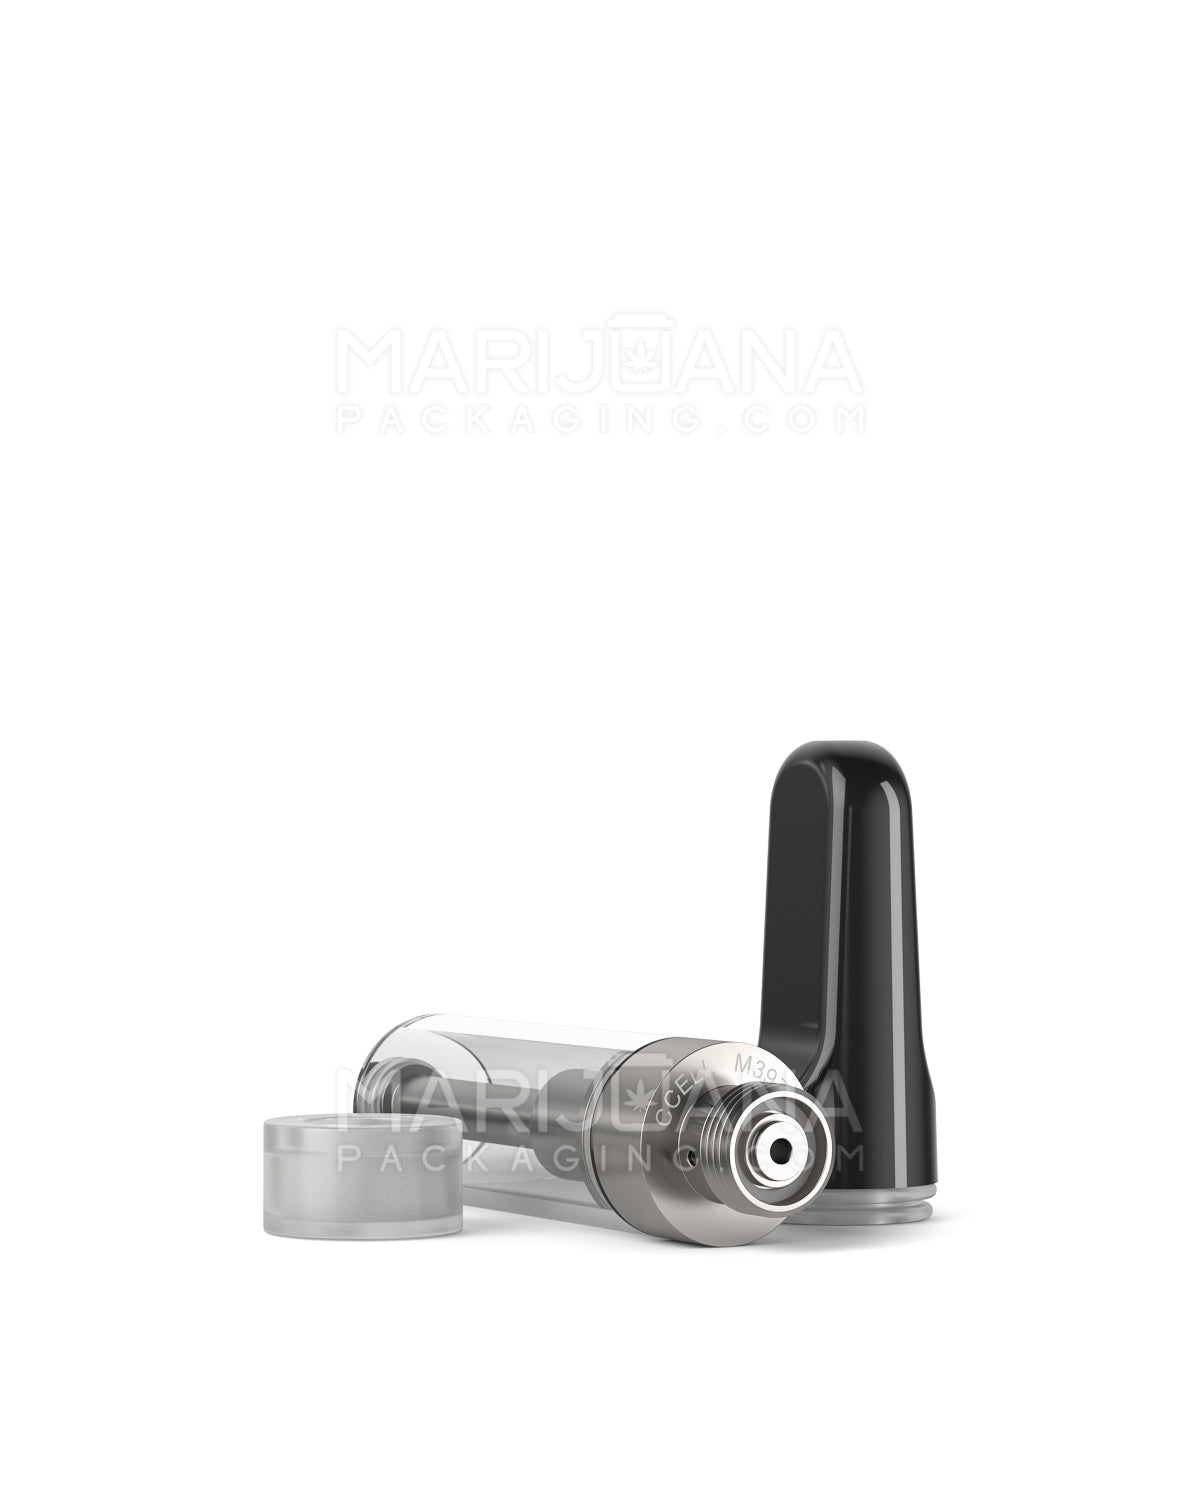 CCELL | Liquid6 Reactor Glass Vape Cartridge with Black Ceramic Mouthpiece | 1mL - Screw On - 100 Count - 8